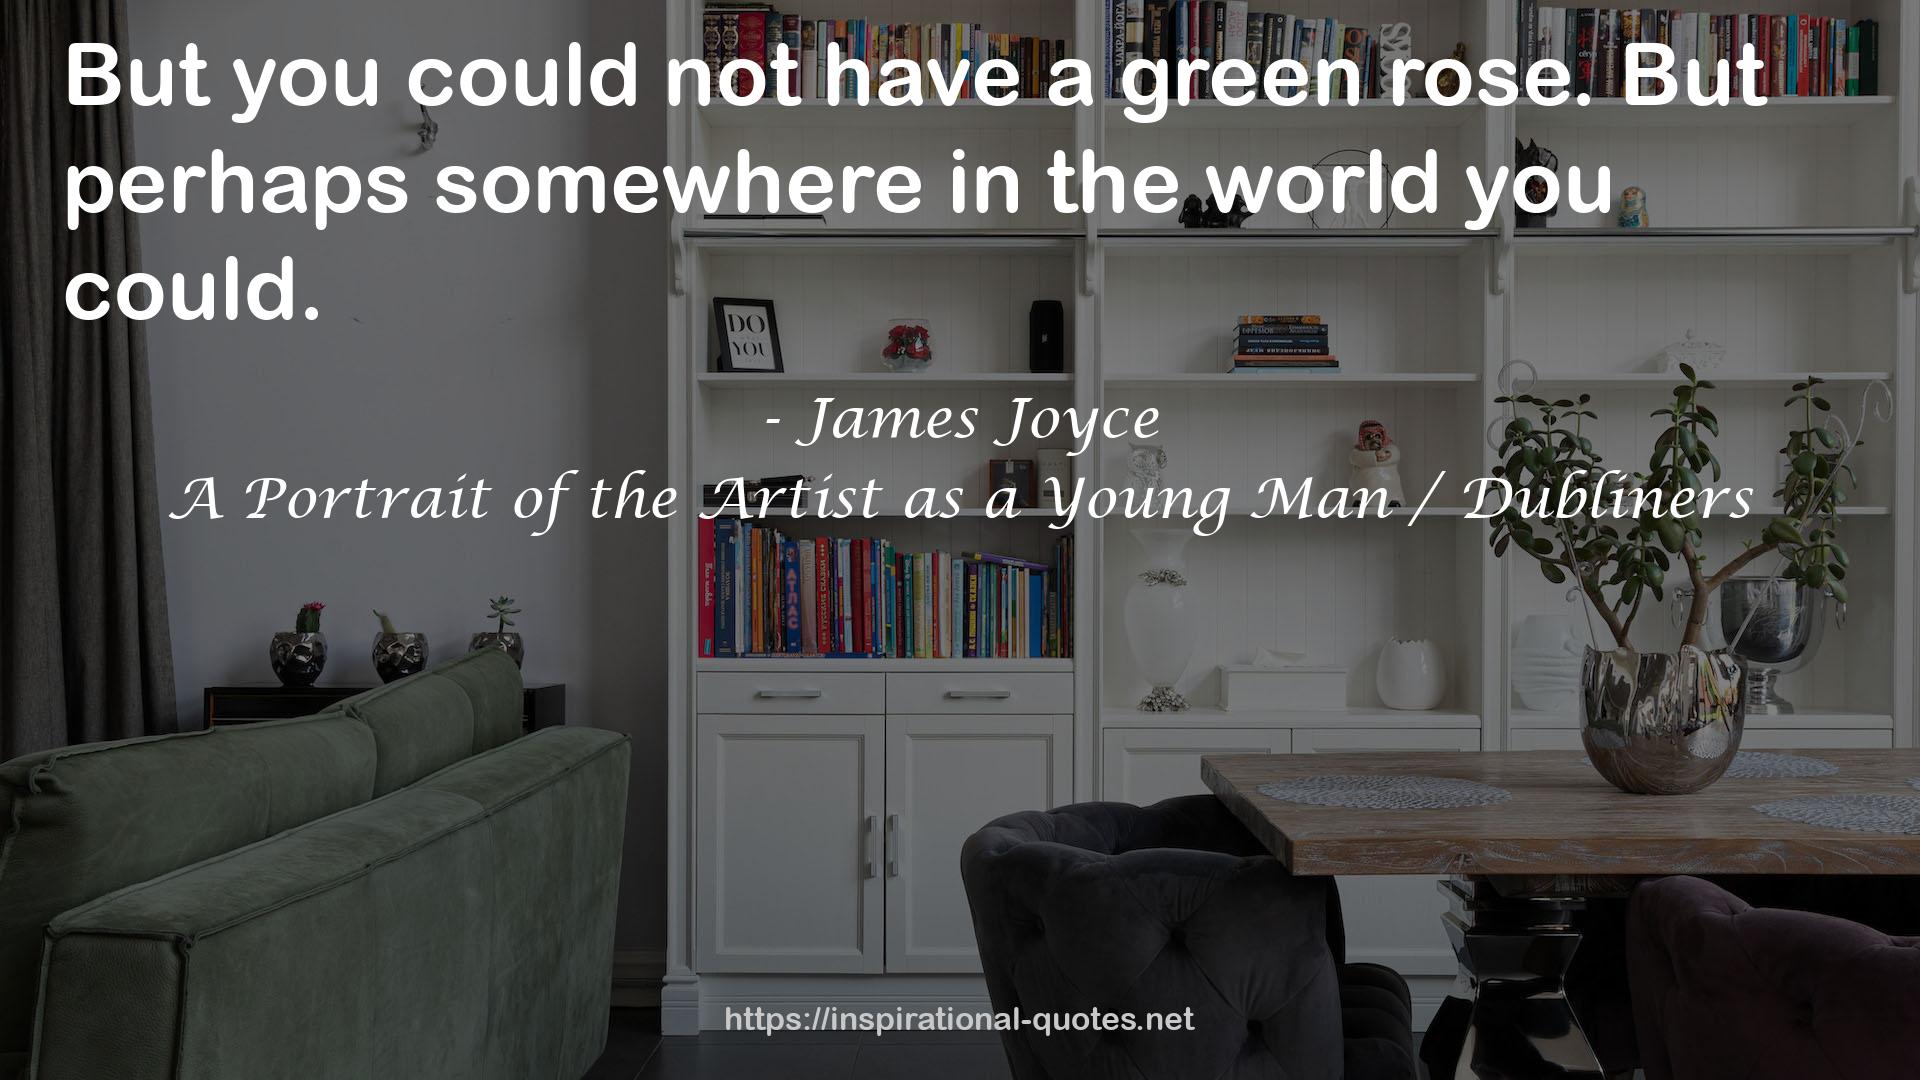 A Portrait of the Artist as a Young Man / Dubliners QUOTES